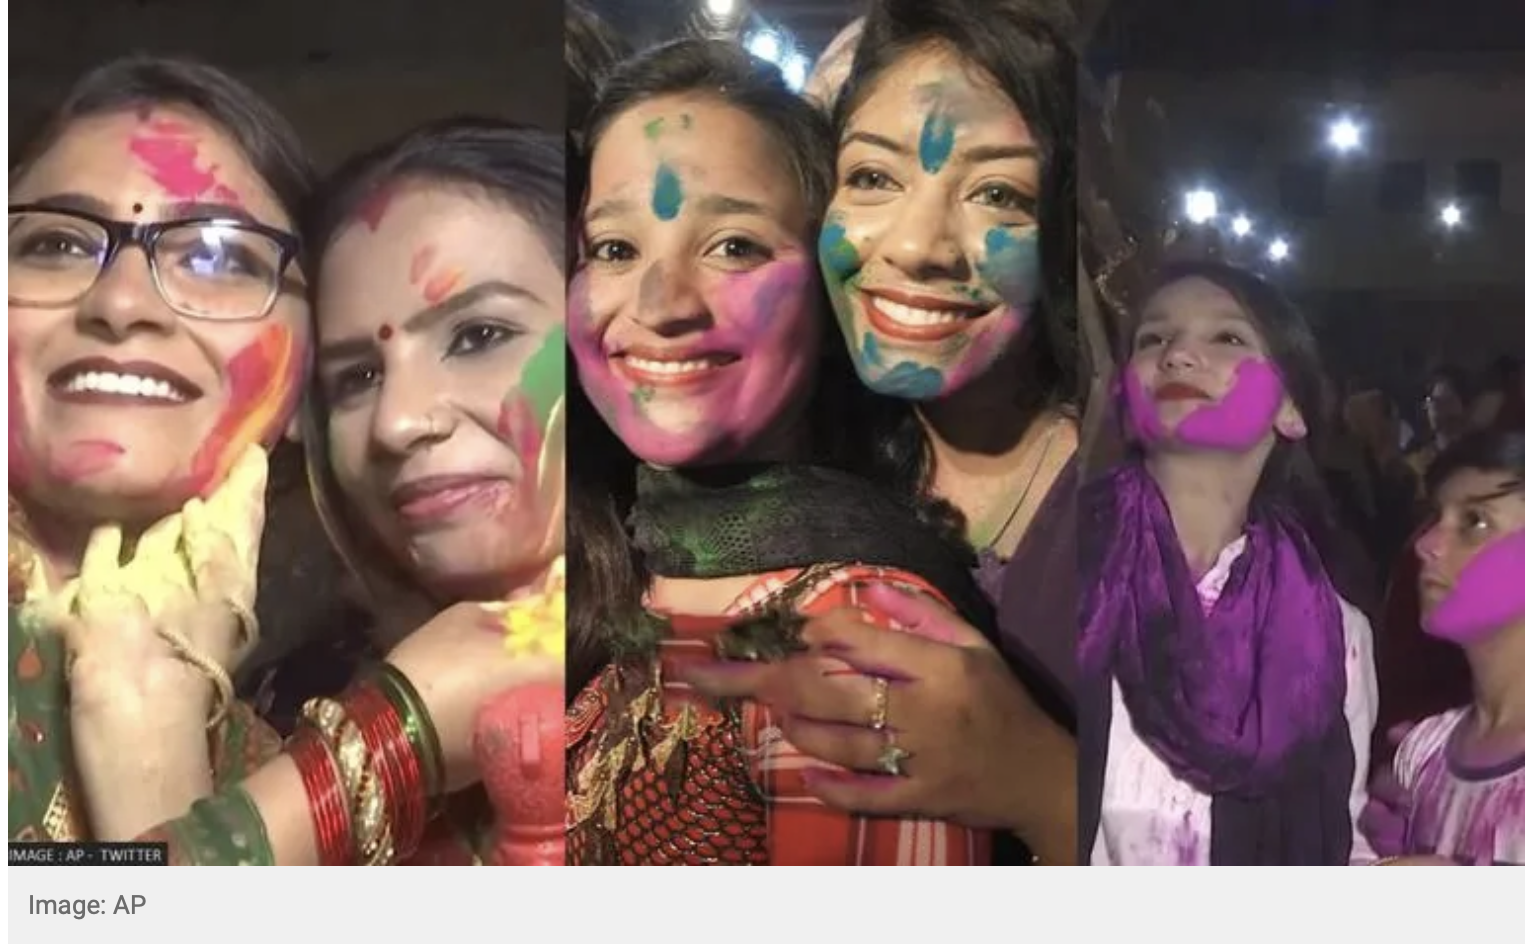 Hindus in Pakistan's Karachi celebrated Holi in all its glory. On the other hand, in Lahore, 15 students were attacked for festivity.